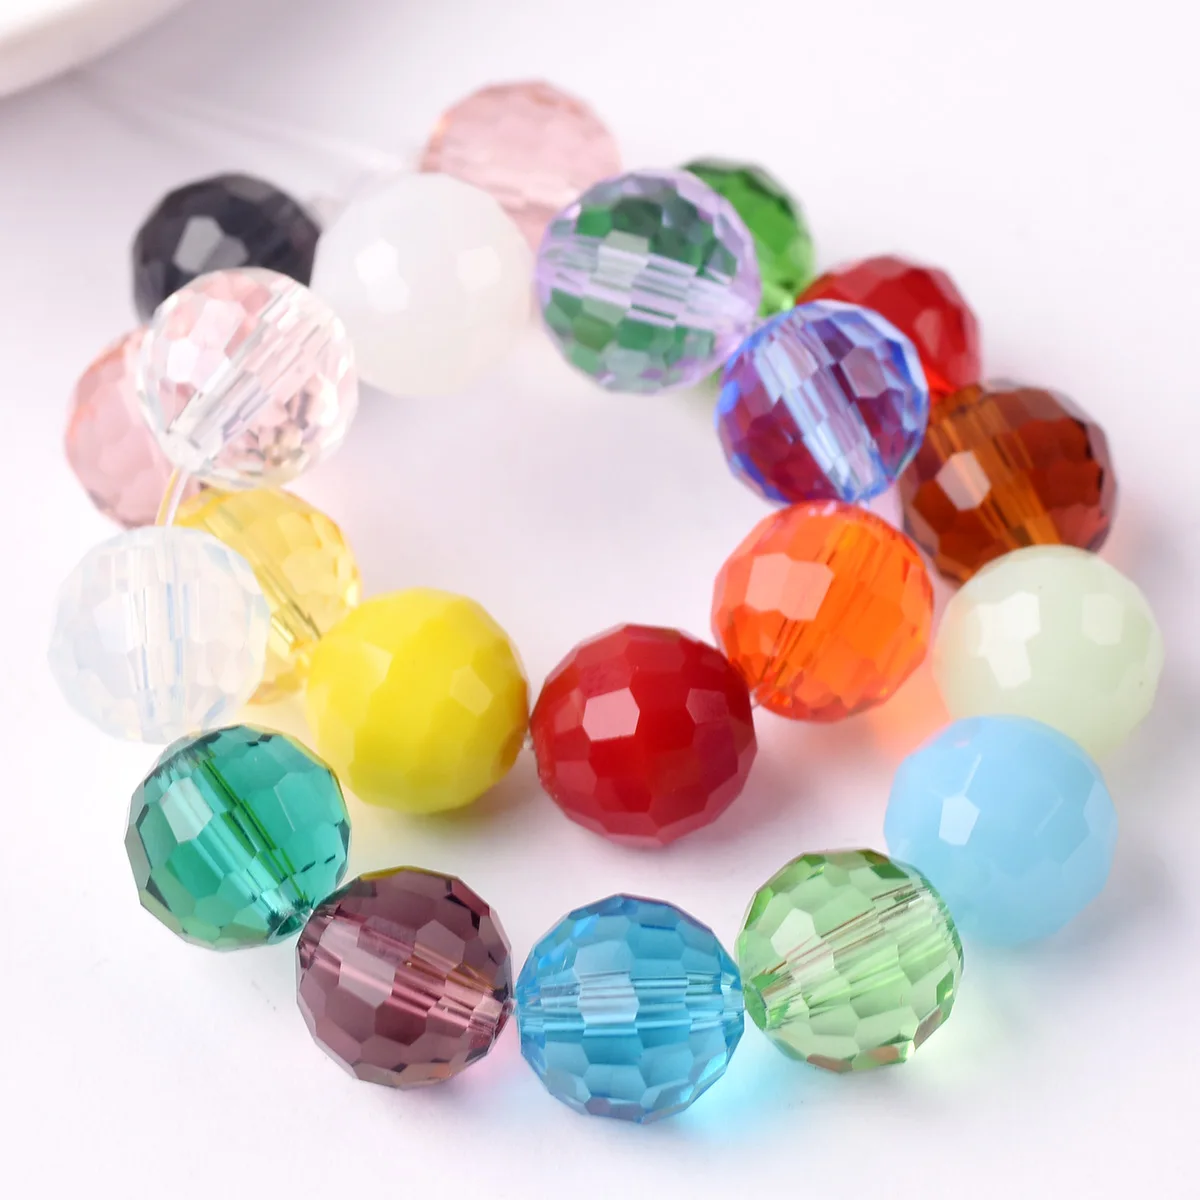 Round 96 Facets 6mm 8mm 10mm 12mm Faceted Crystal Glass Loose Spacer Beads Wholesale Bulk Lot For Jewelry Making Findings 50pcs mixed colorful round polymer clay loose beads 6mm 8mm 10mm 12mm wholesale bulk lot for jewelry making diy bracelet